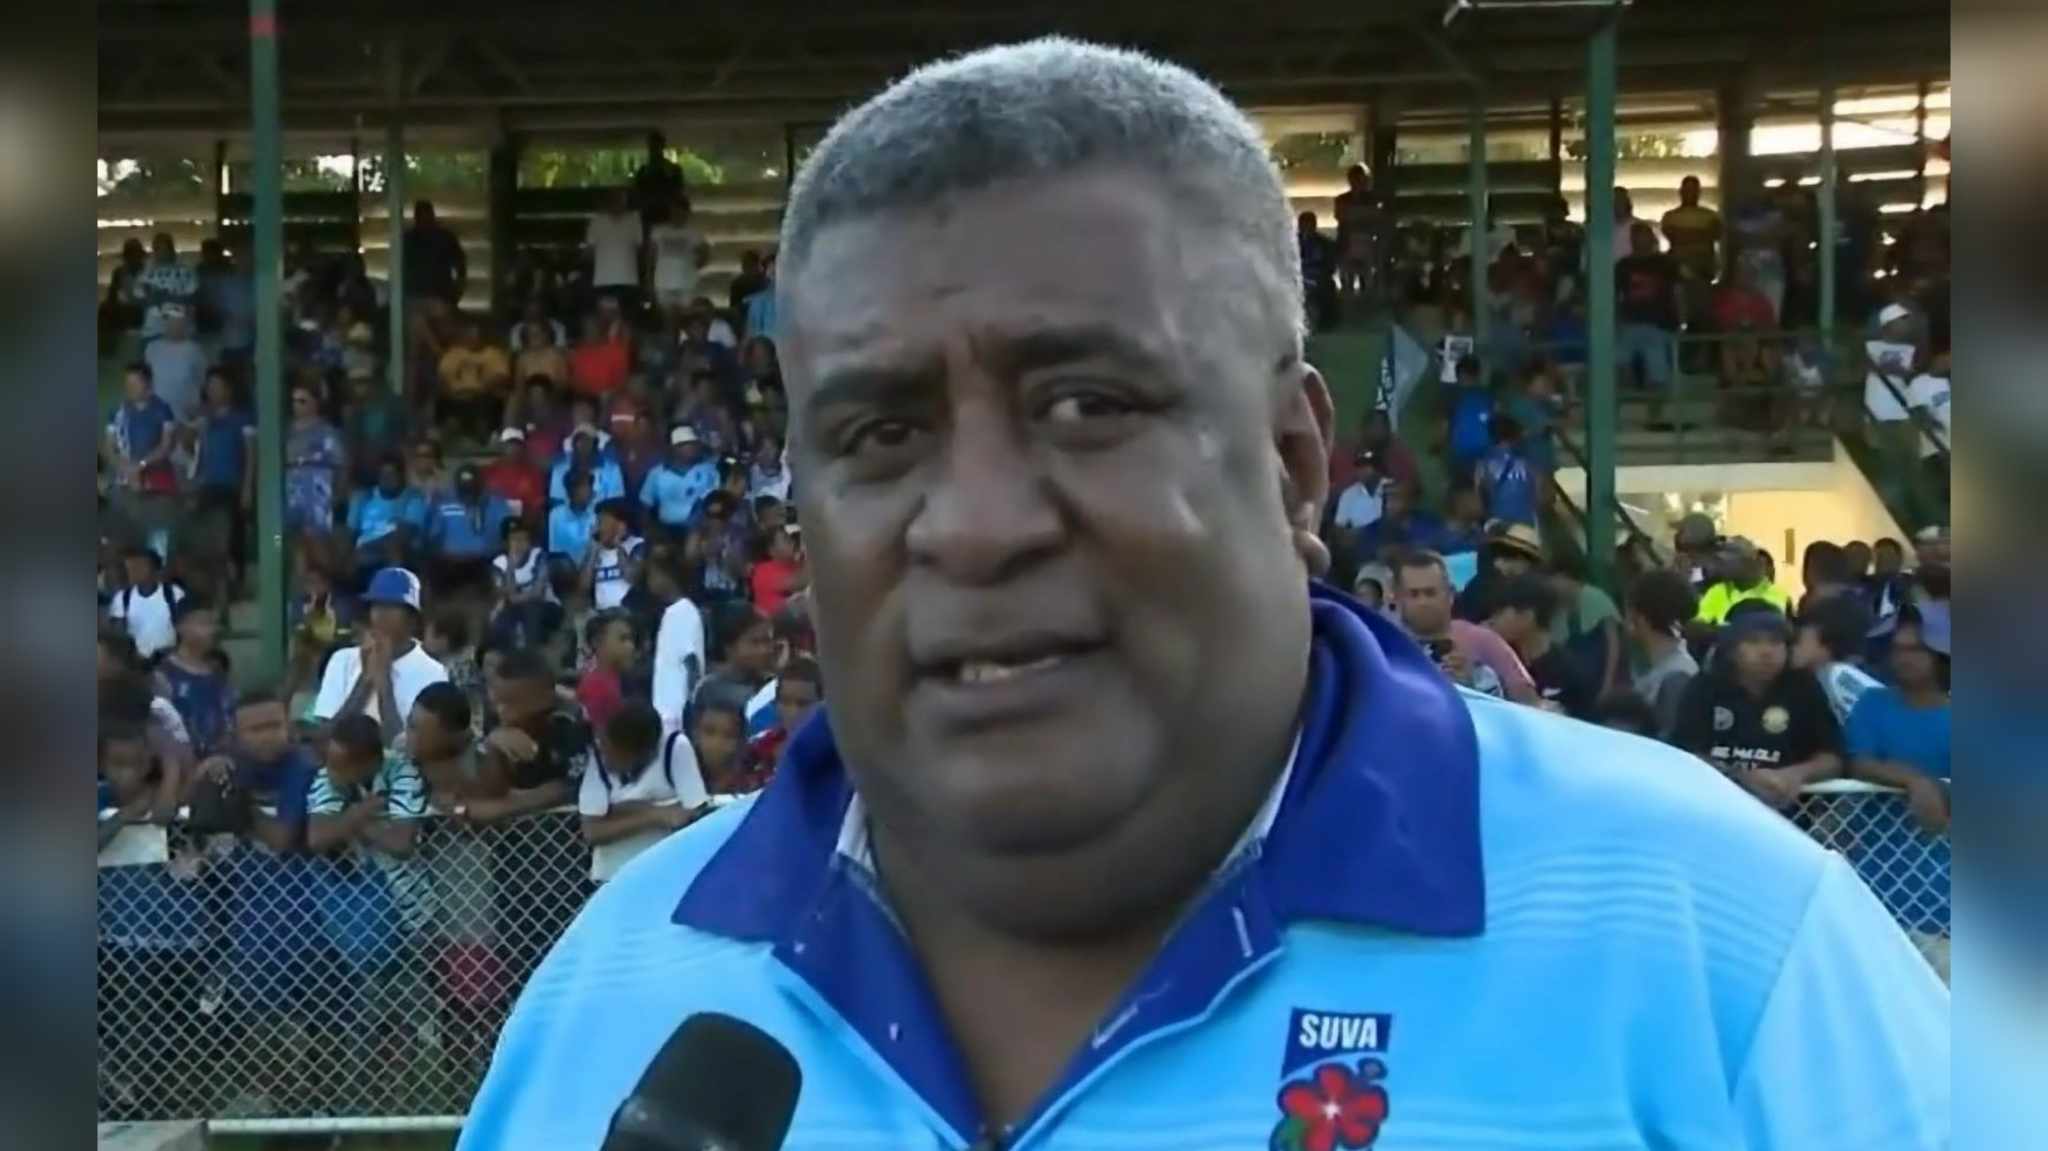 Suva rugby union secretary keen for FRU's reforms to lead them down the path towards financal independence